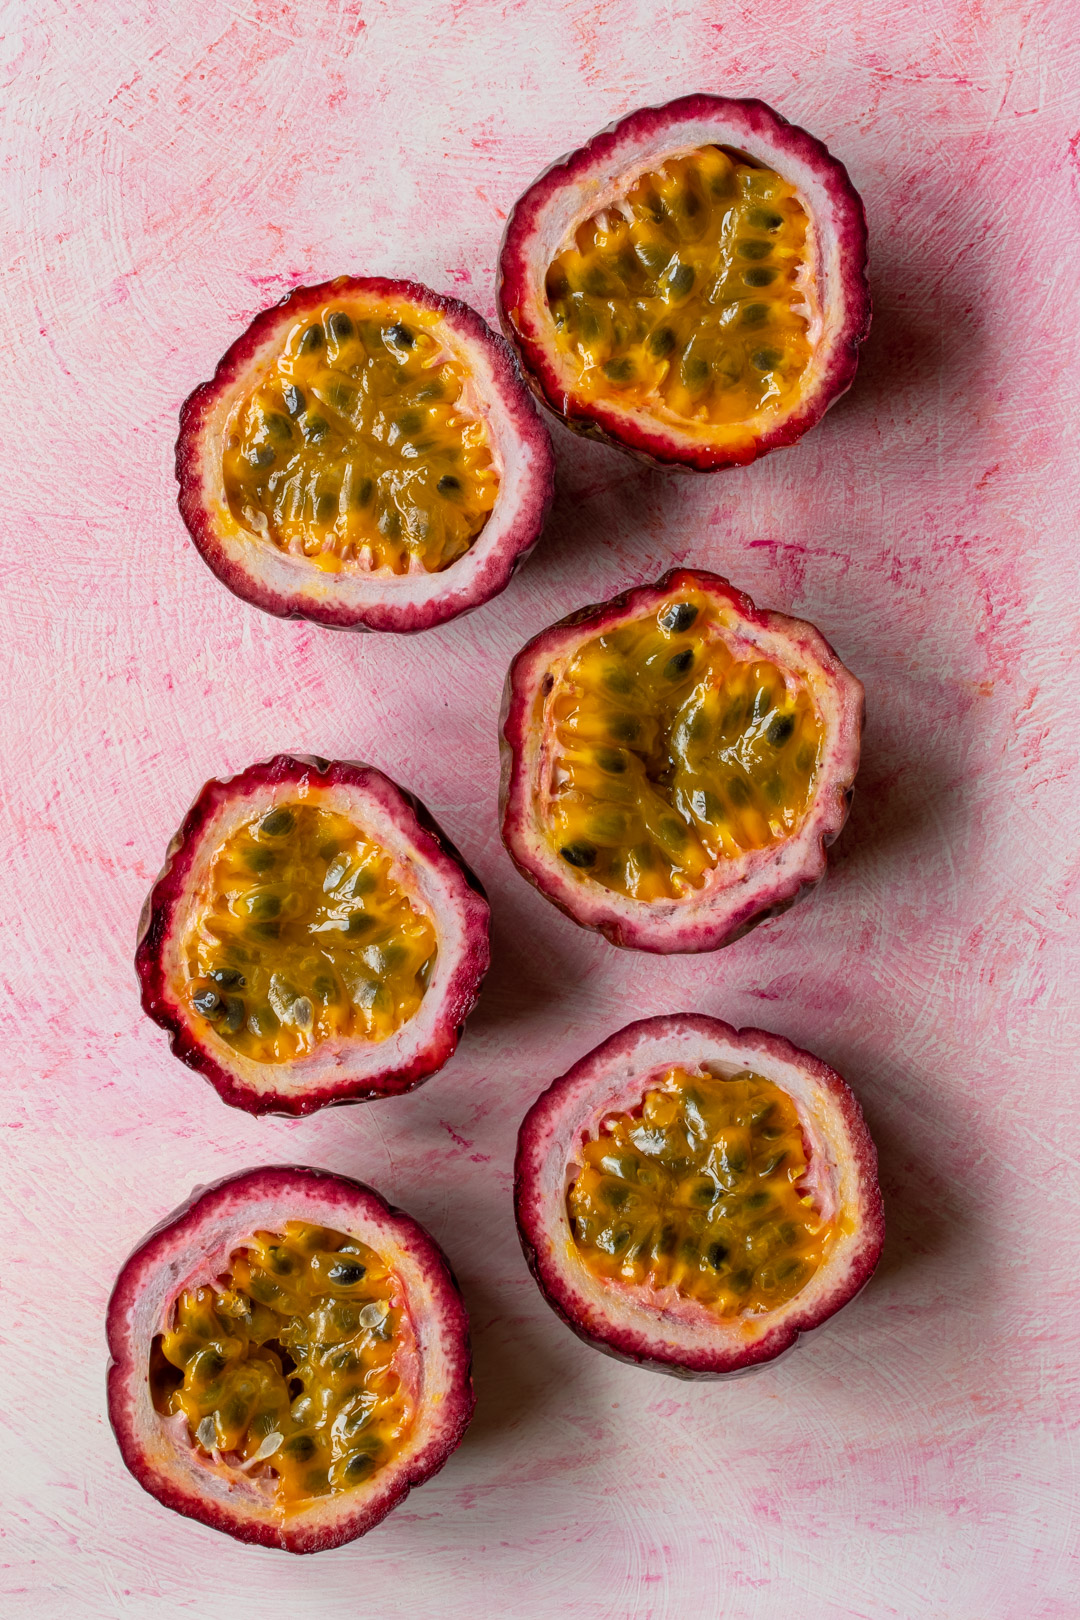 passionfruit for passionfruit and chocolate cream lactarts